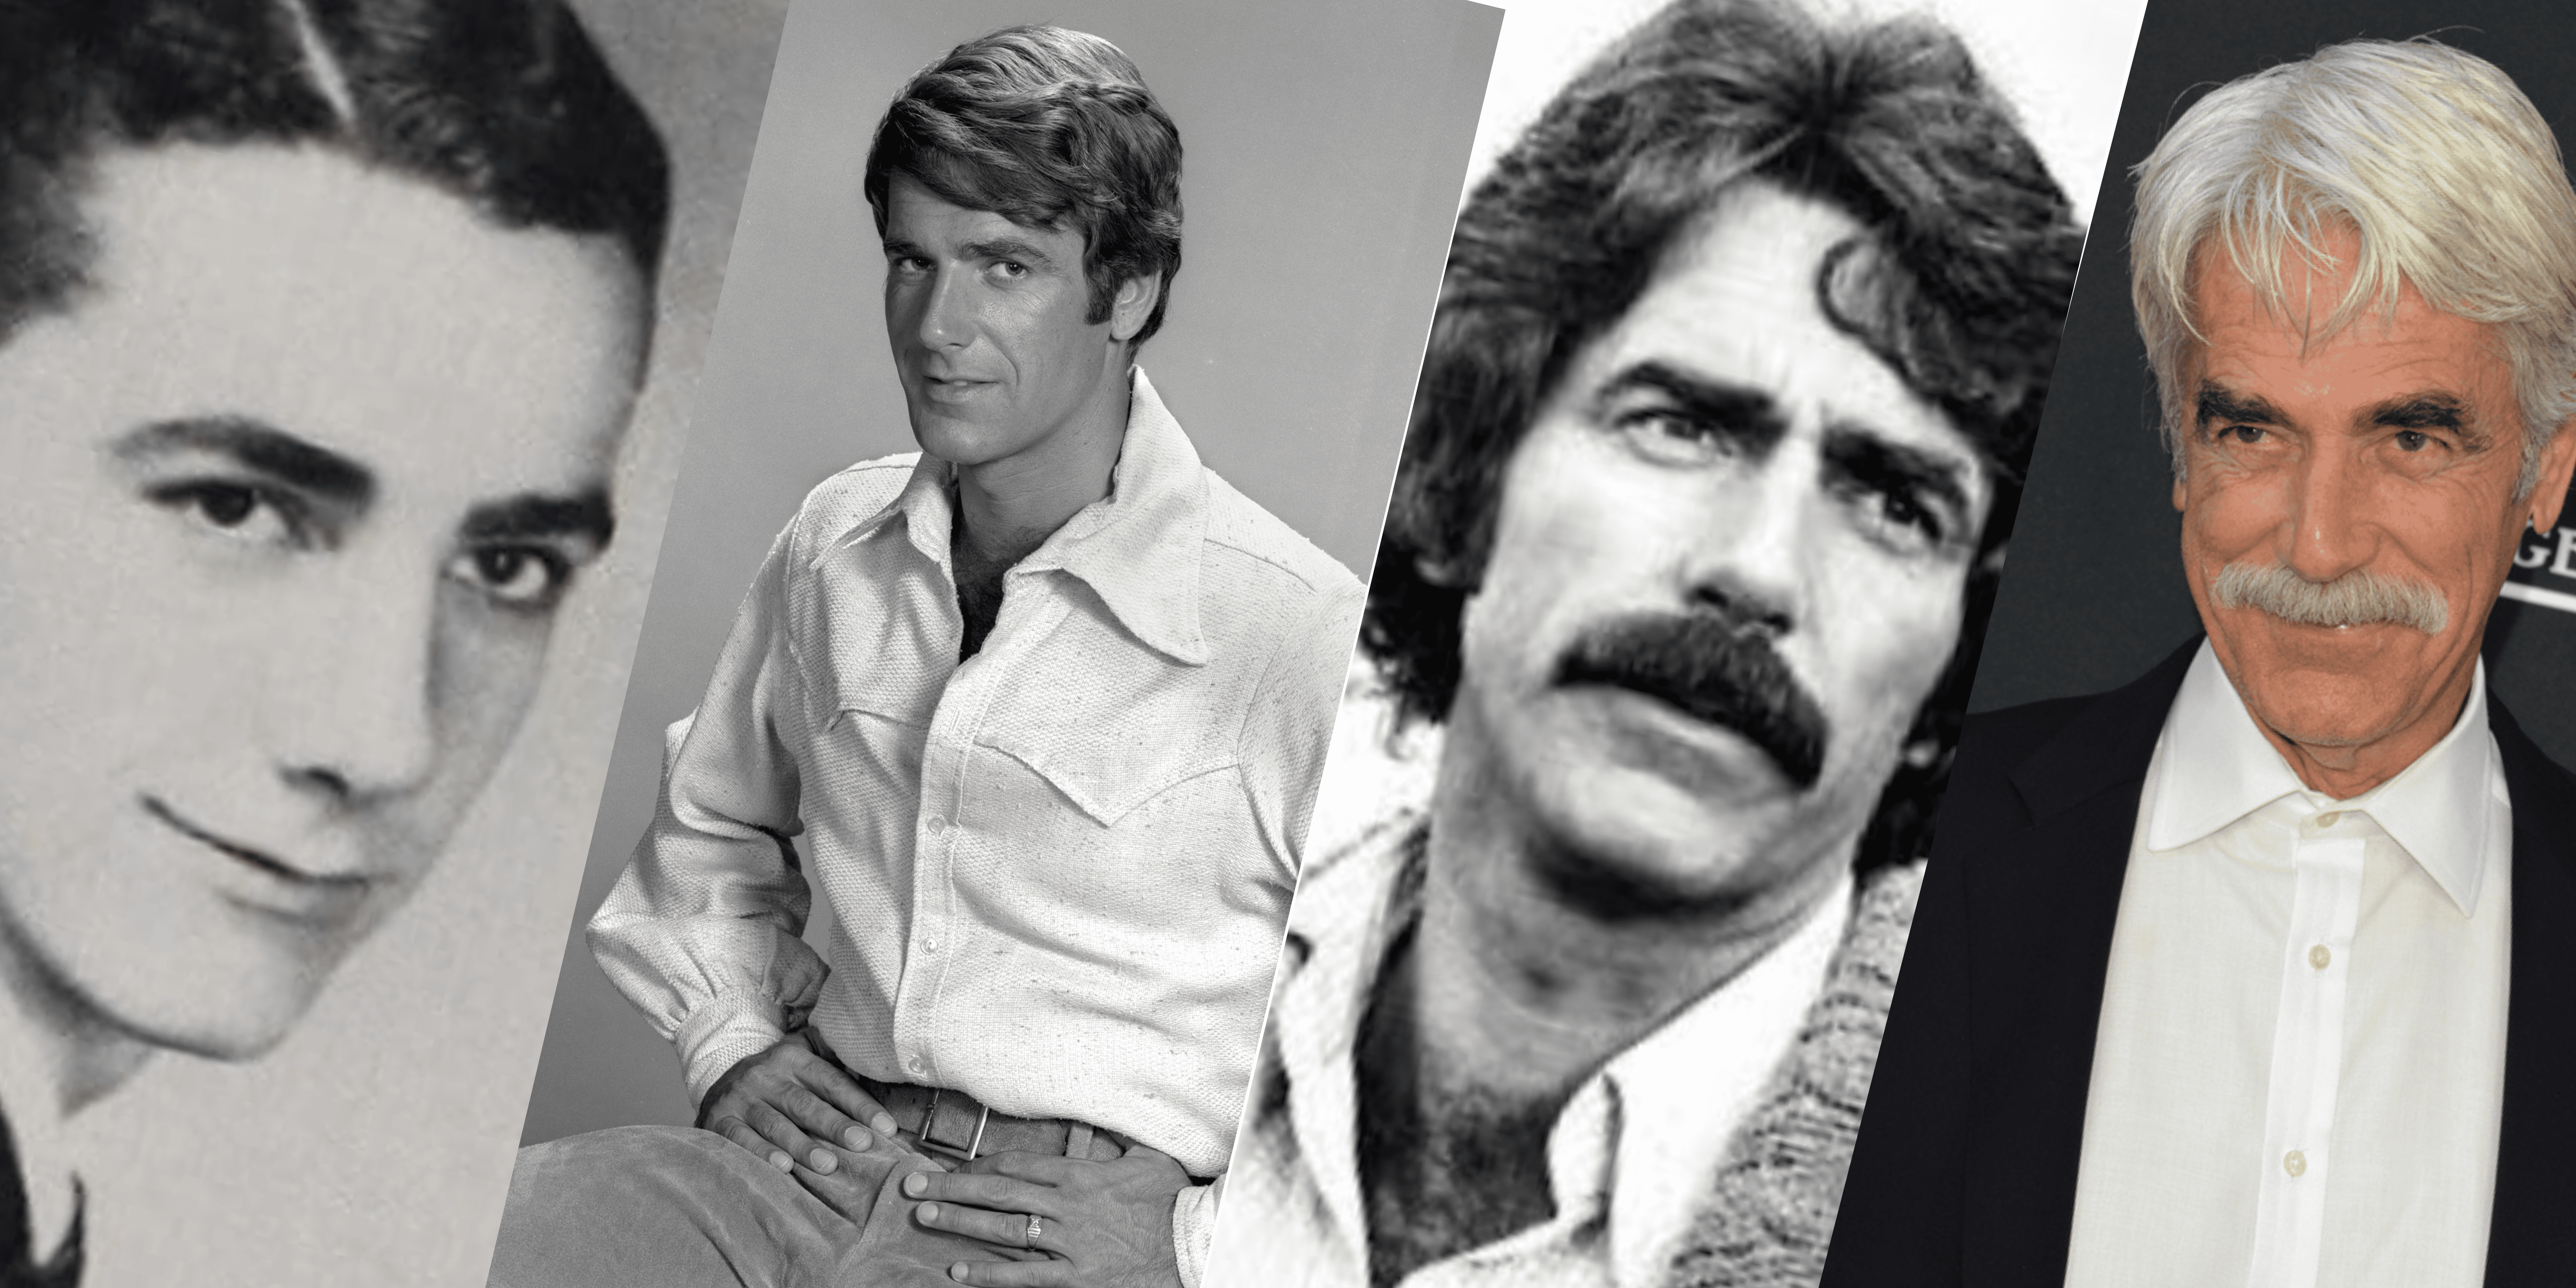 Check out Sam Elliott when he was young through photos that will lead you b...